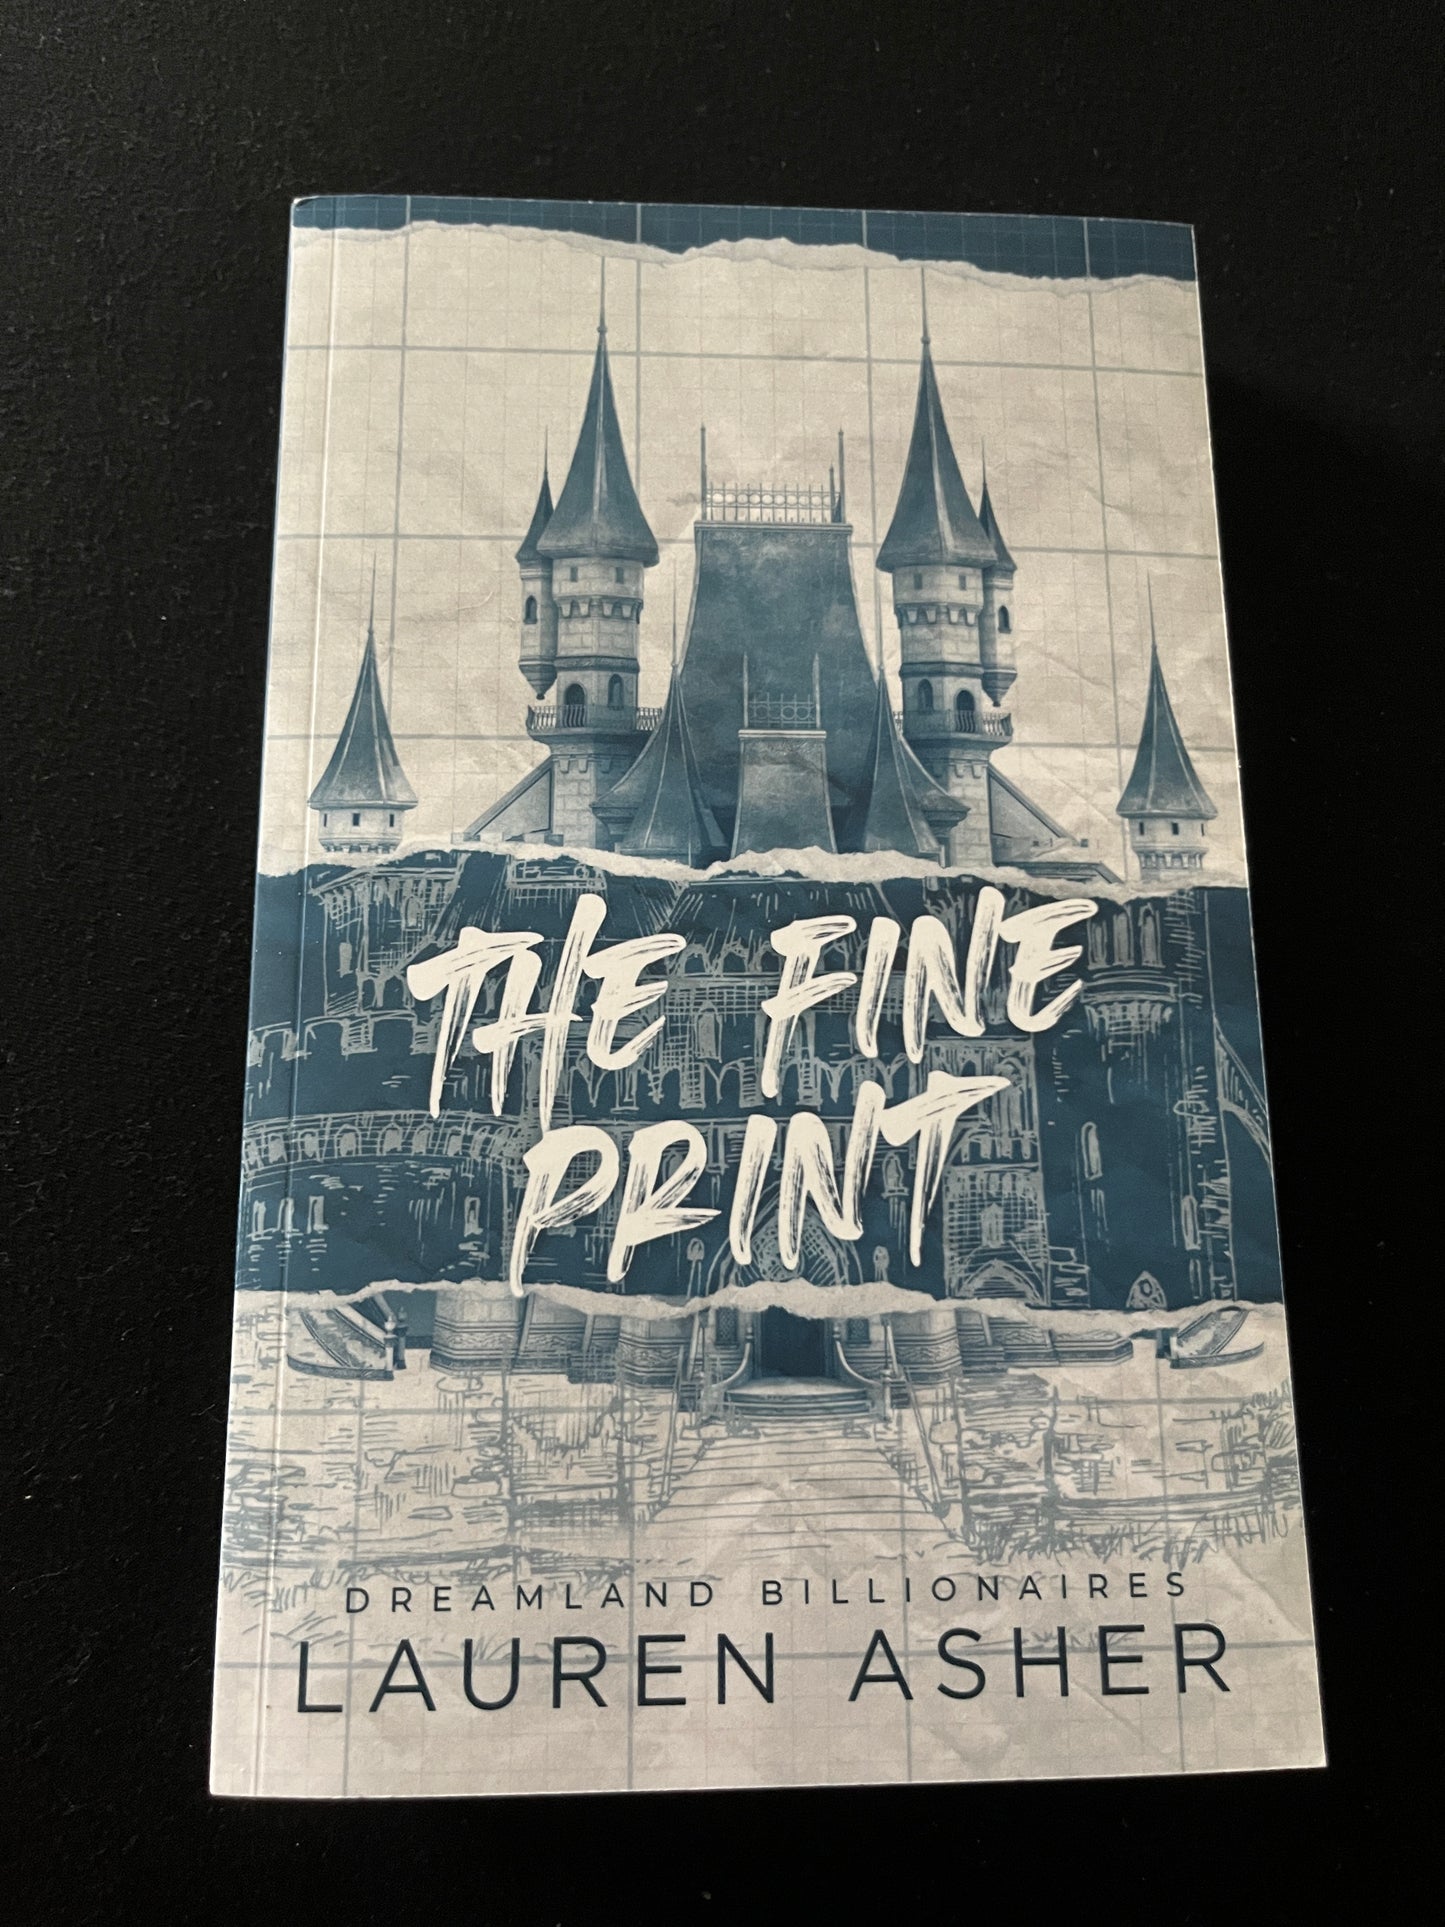 THE FINE PRINT by Lauren Asher